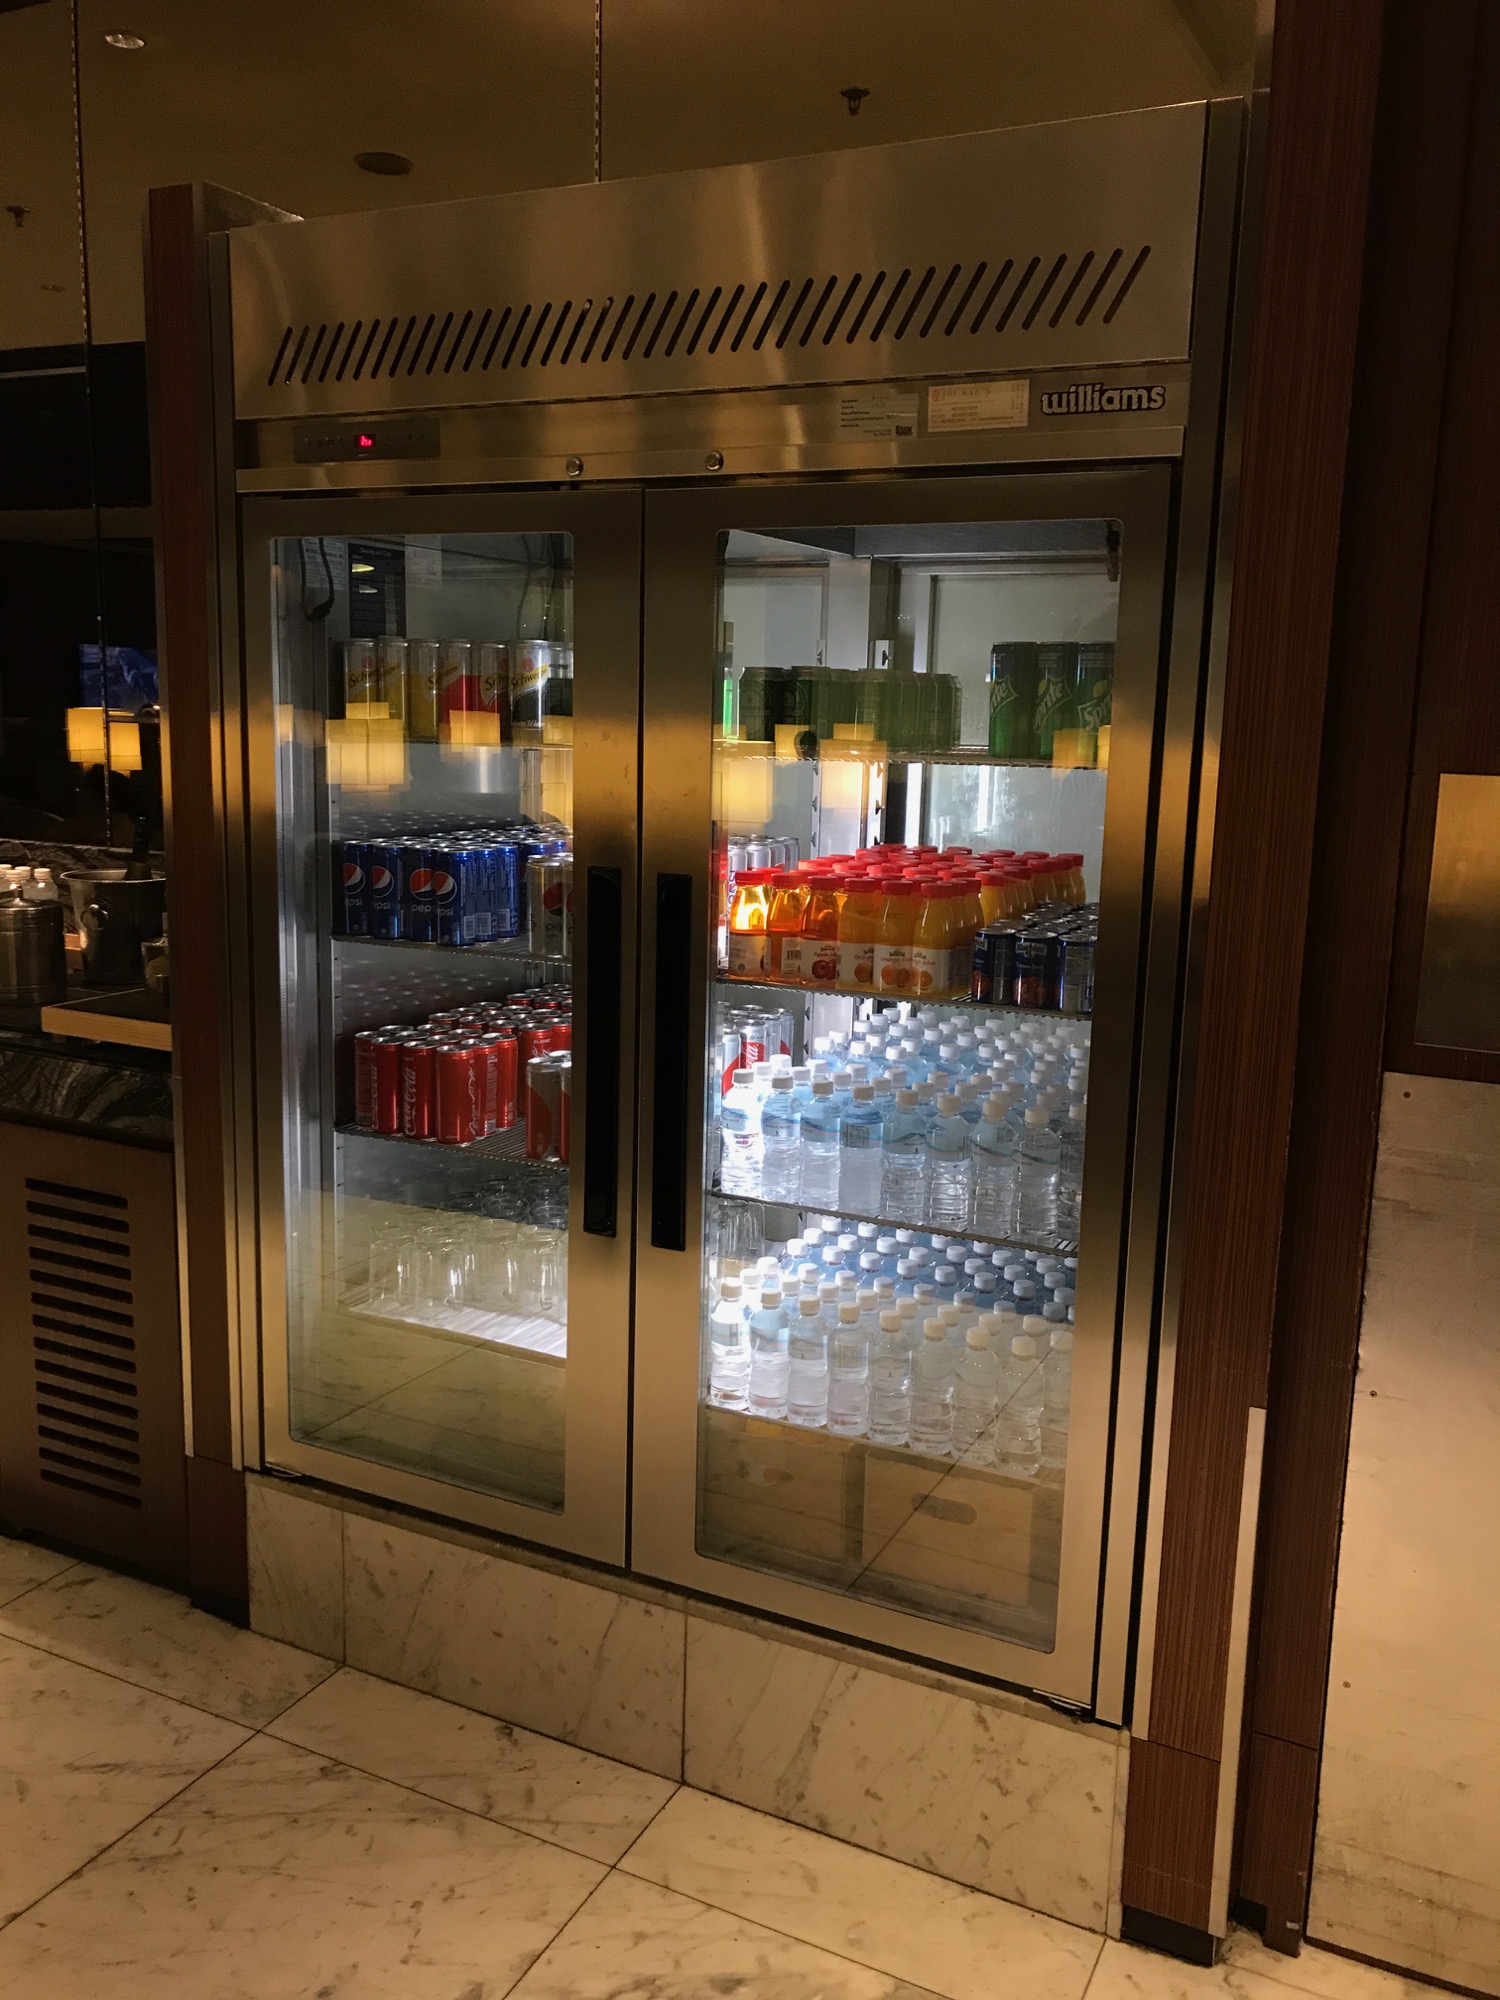 a refrigerator with drinks and cans